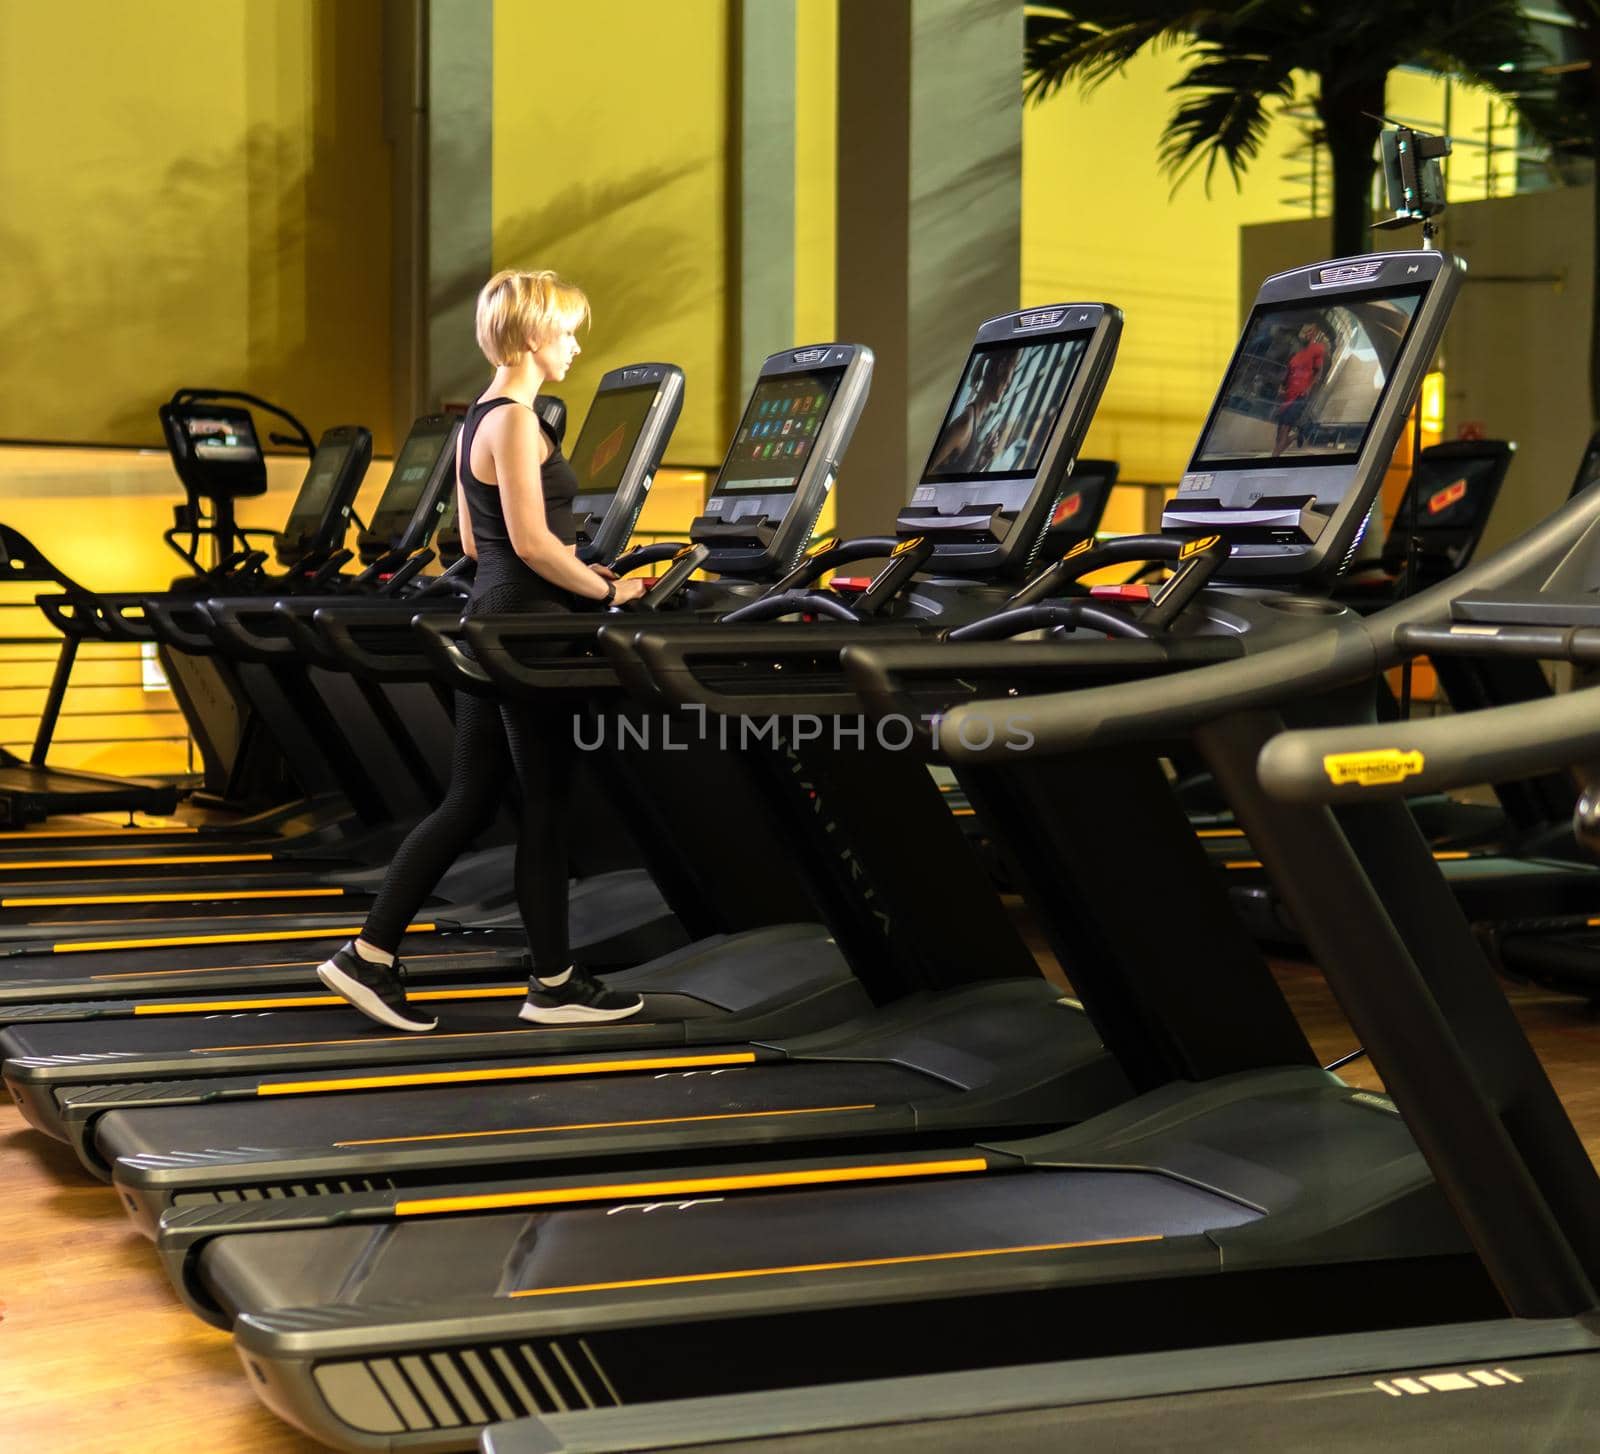 Simulator track workout run lifestyle, from exercise person for girl young health, athletic wellness. Indoor recreation legs, happy